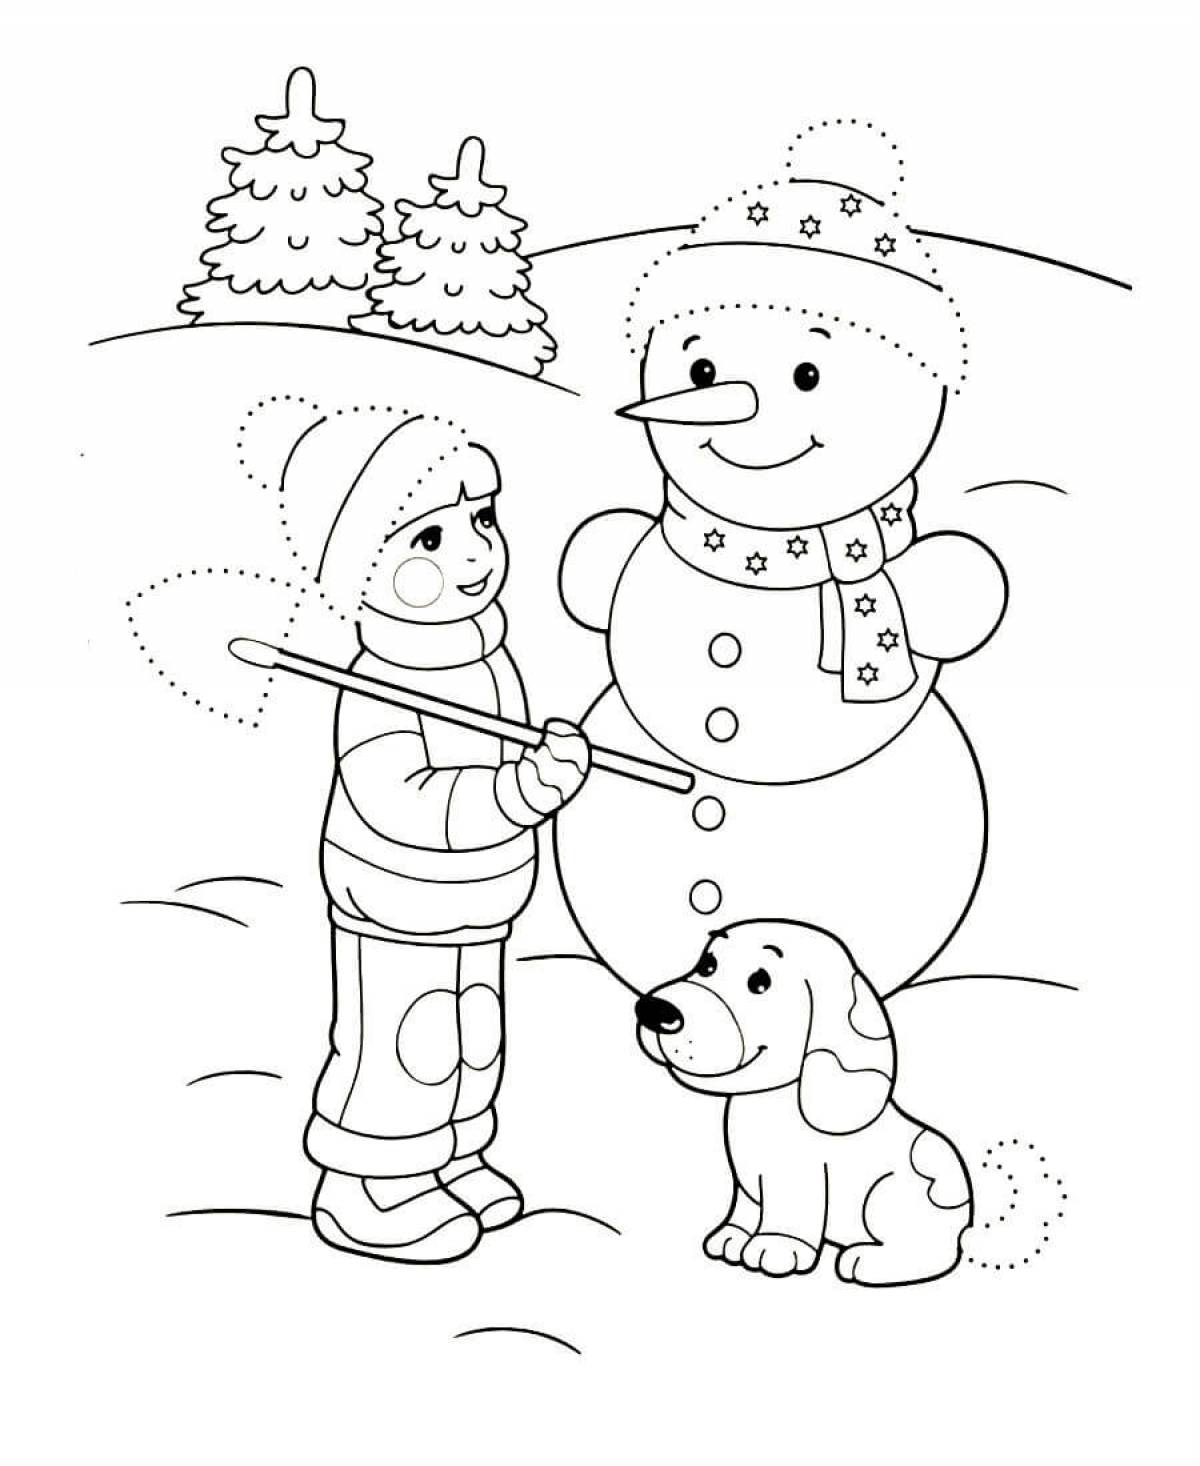 Snowman by dots